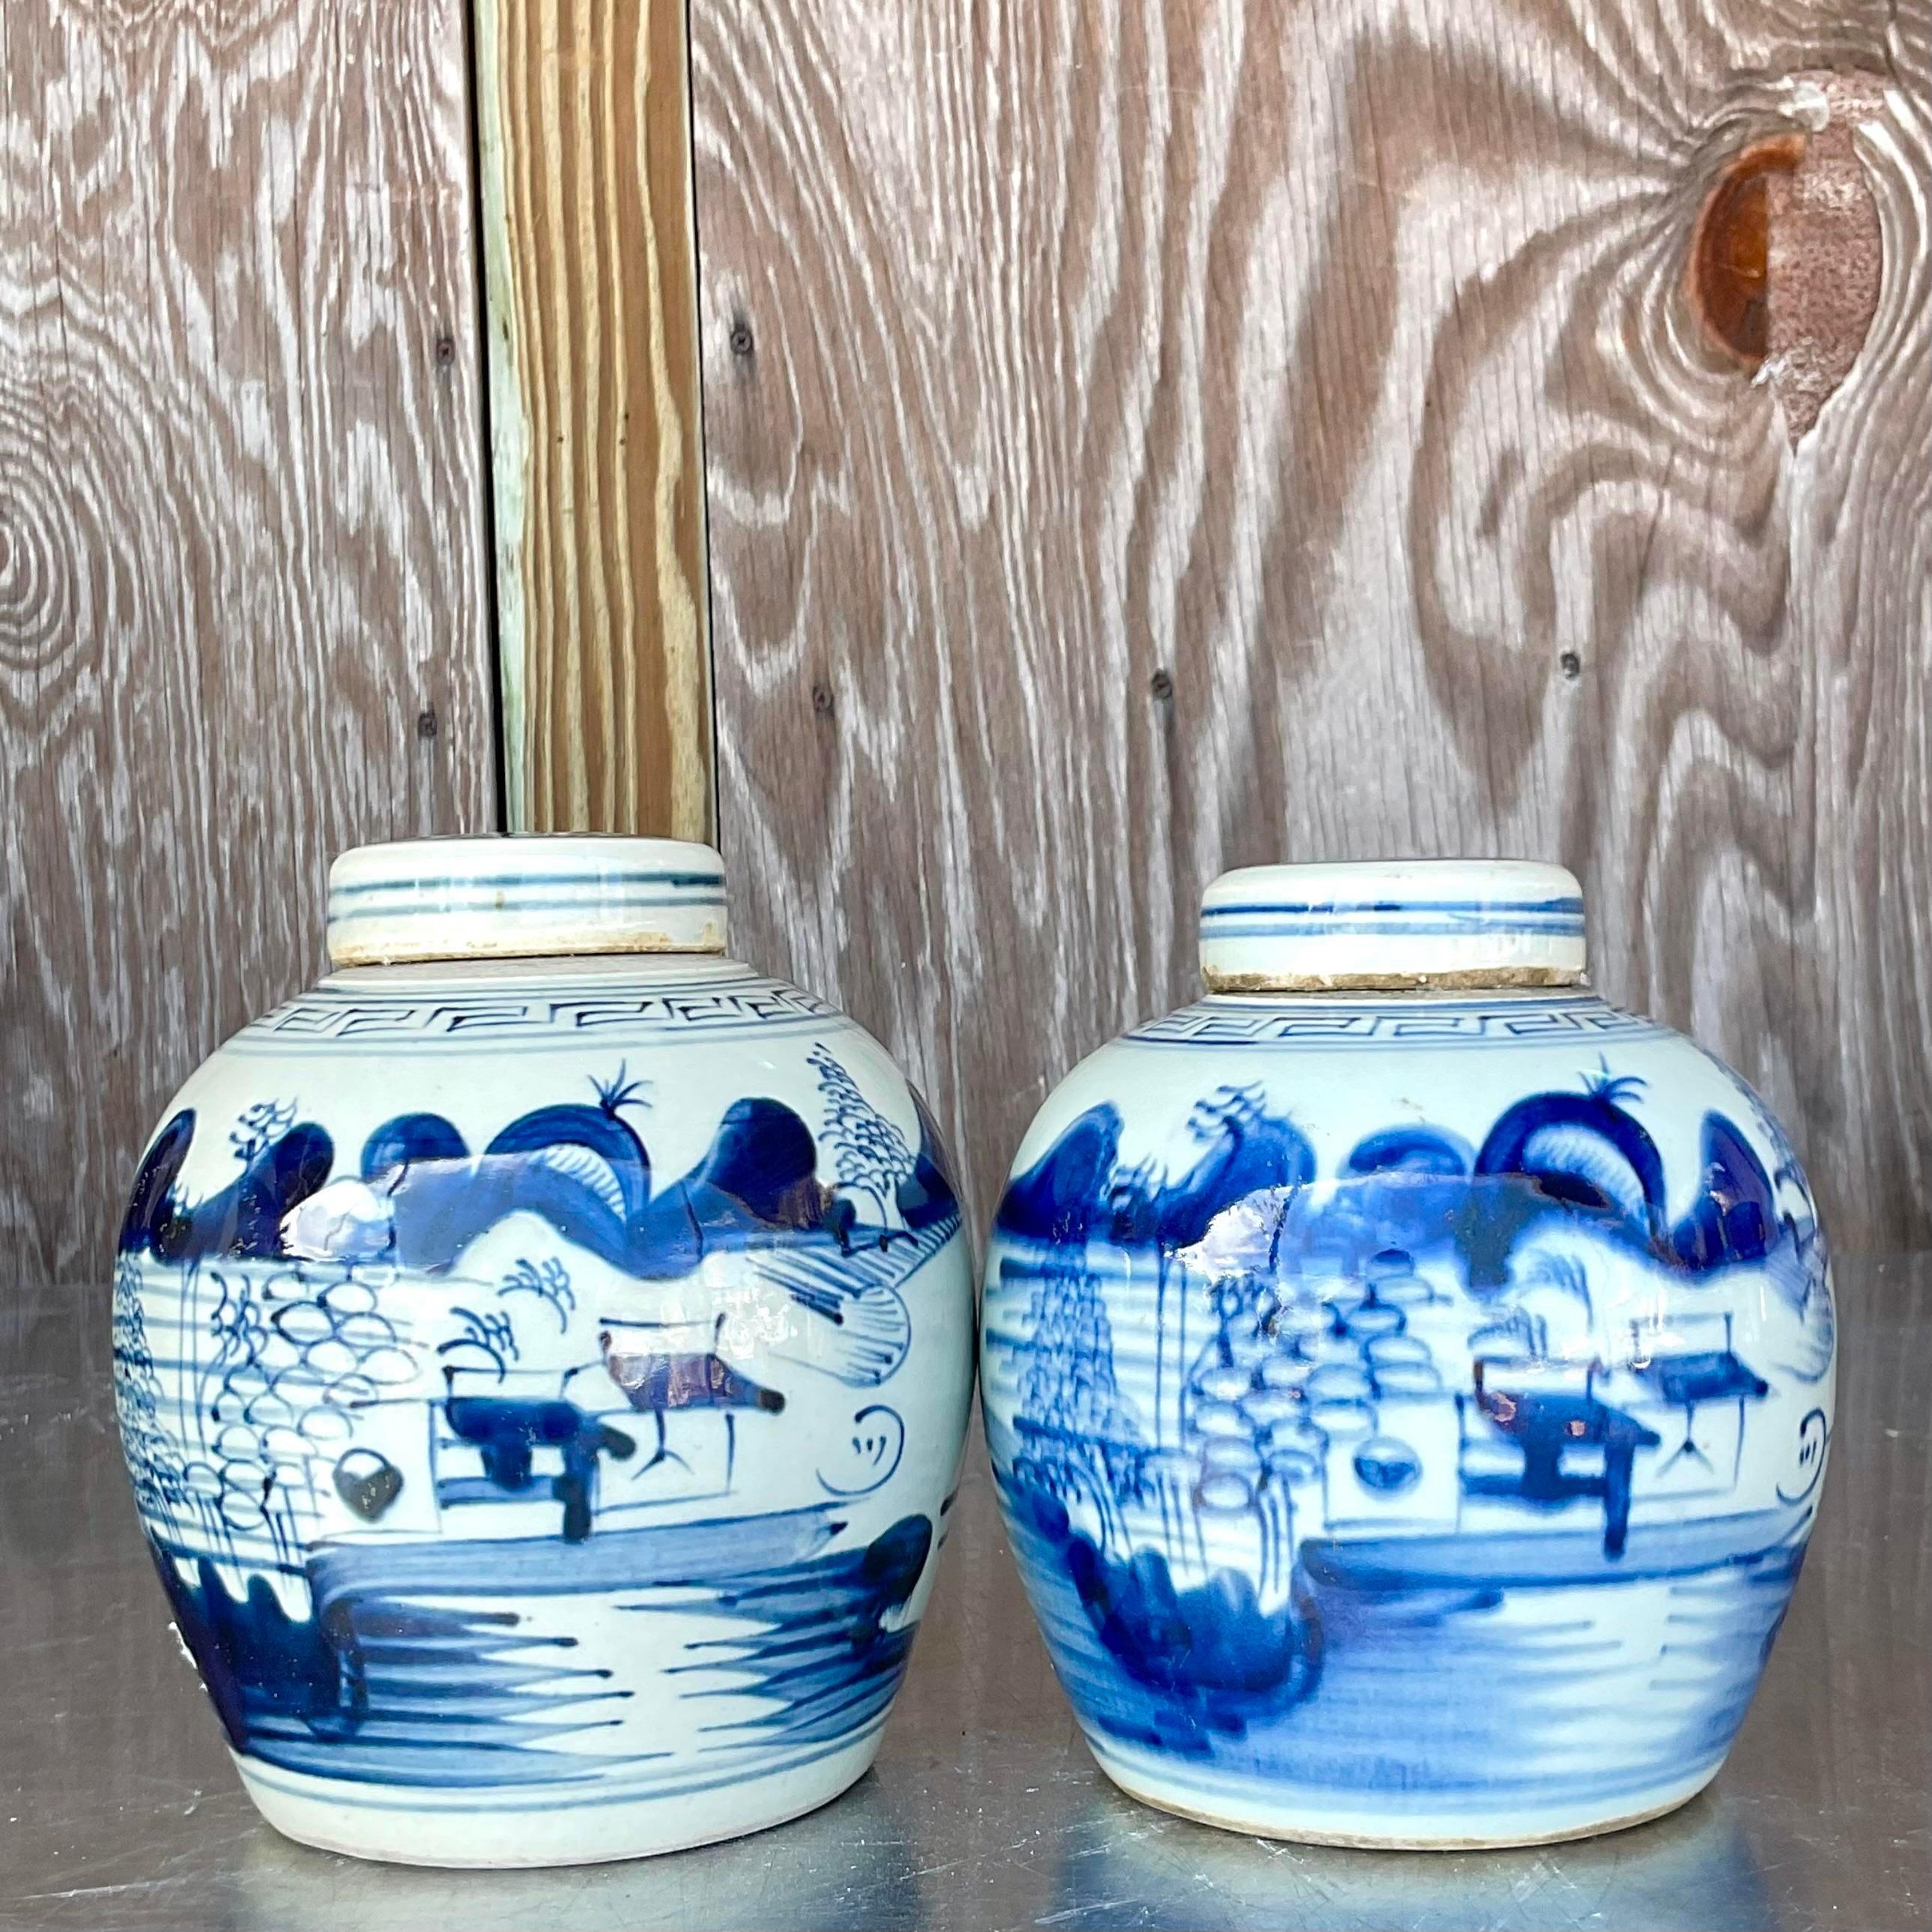 A fabulous pair of vintage petite ginger jars. A charming pair of blue and white vessels with a classic Asian motif. Each has its own lid. Unsigned. Acquired from a Palm Beach estate.